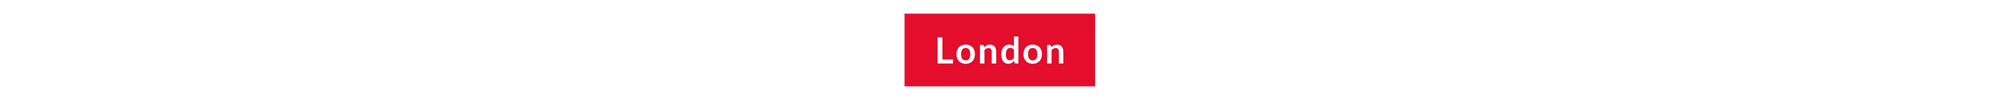 The word London in a red block